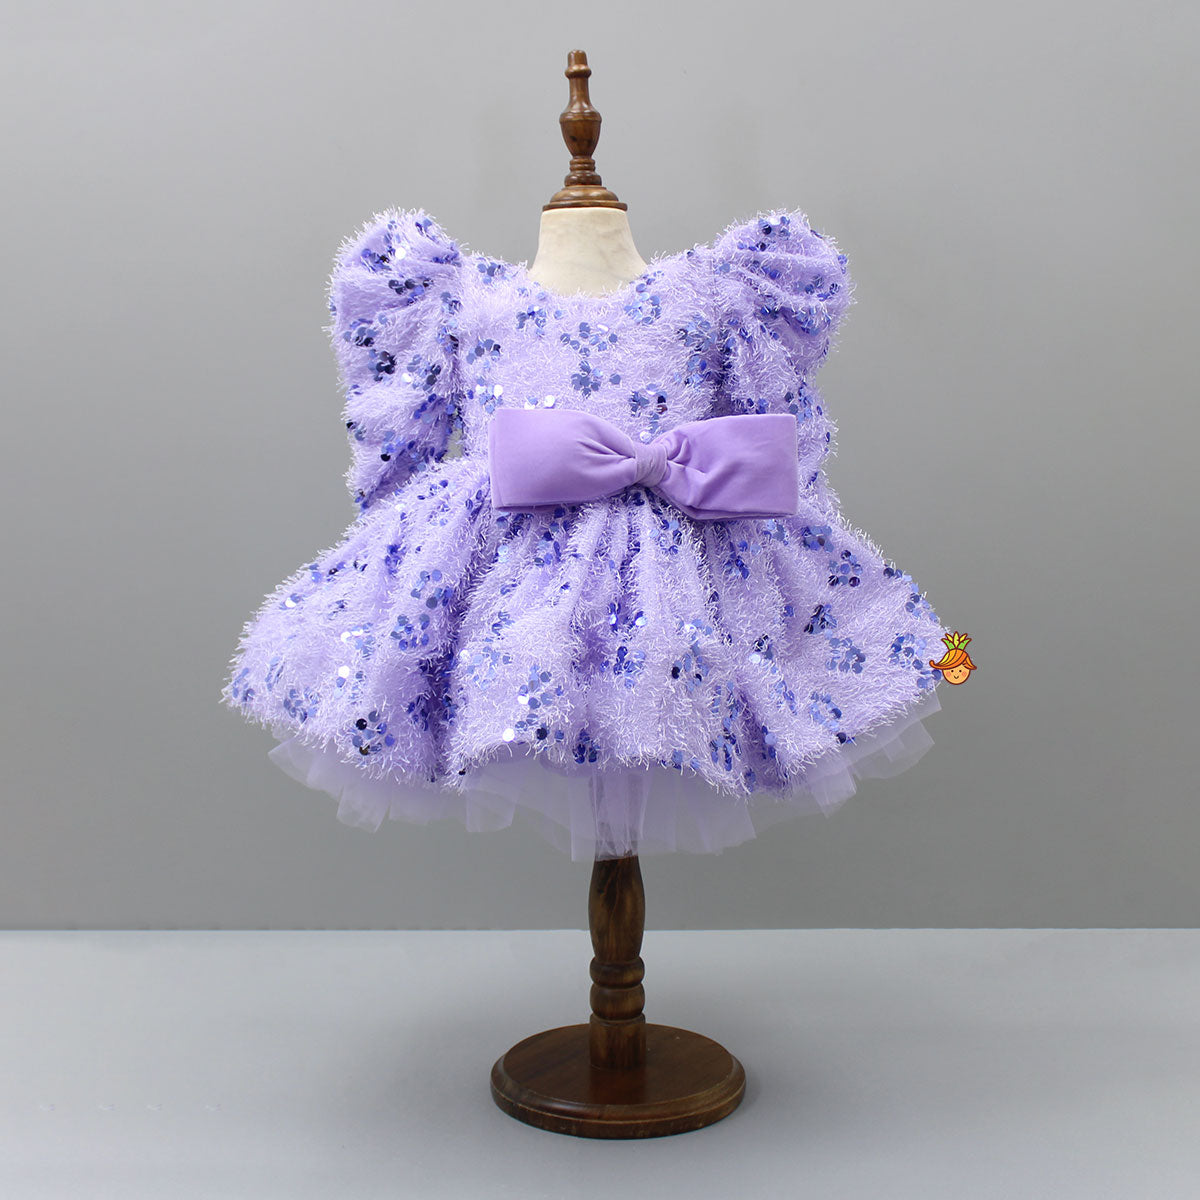 Pre Order: Stylish Sleeves Exquisite Lavender Fur Dress With Head Band